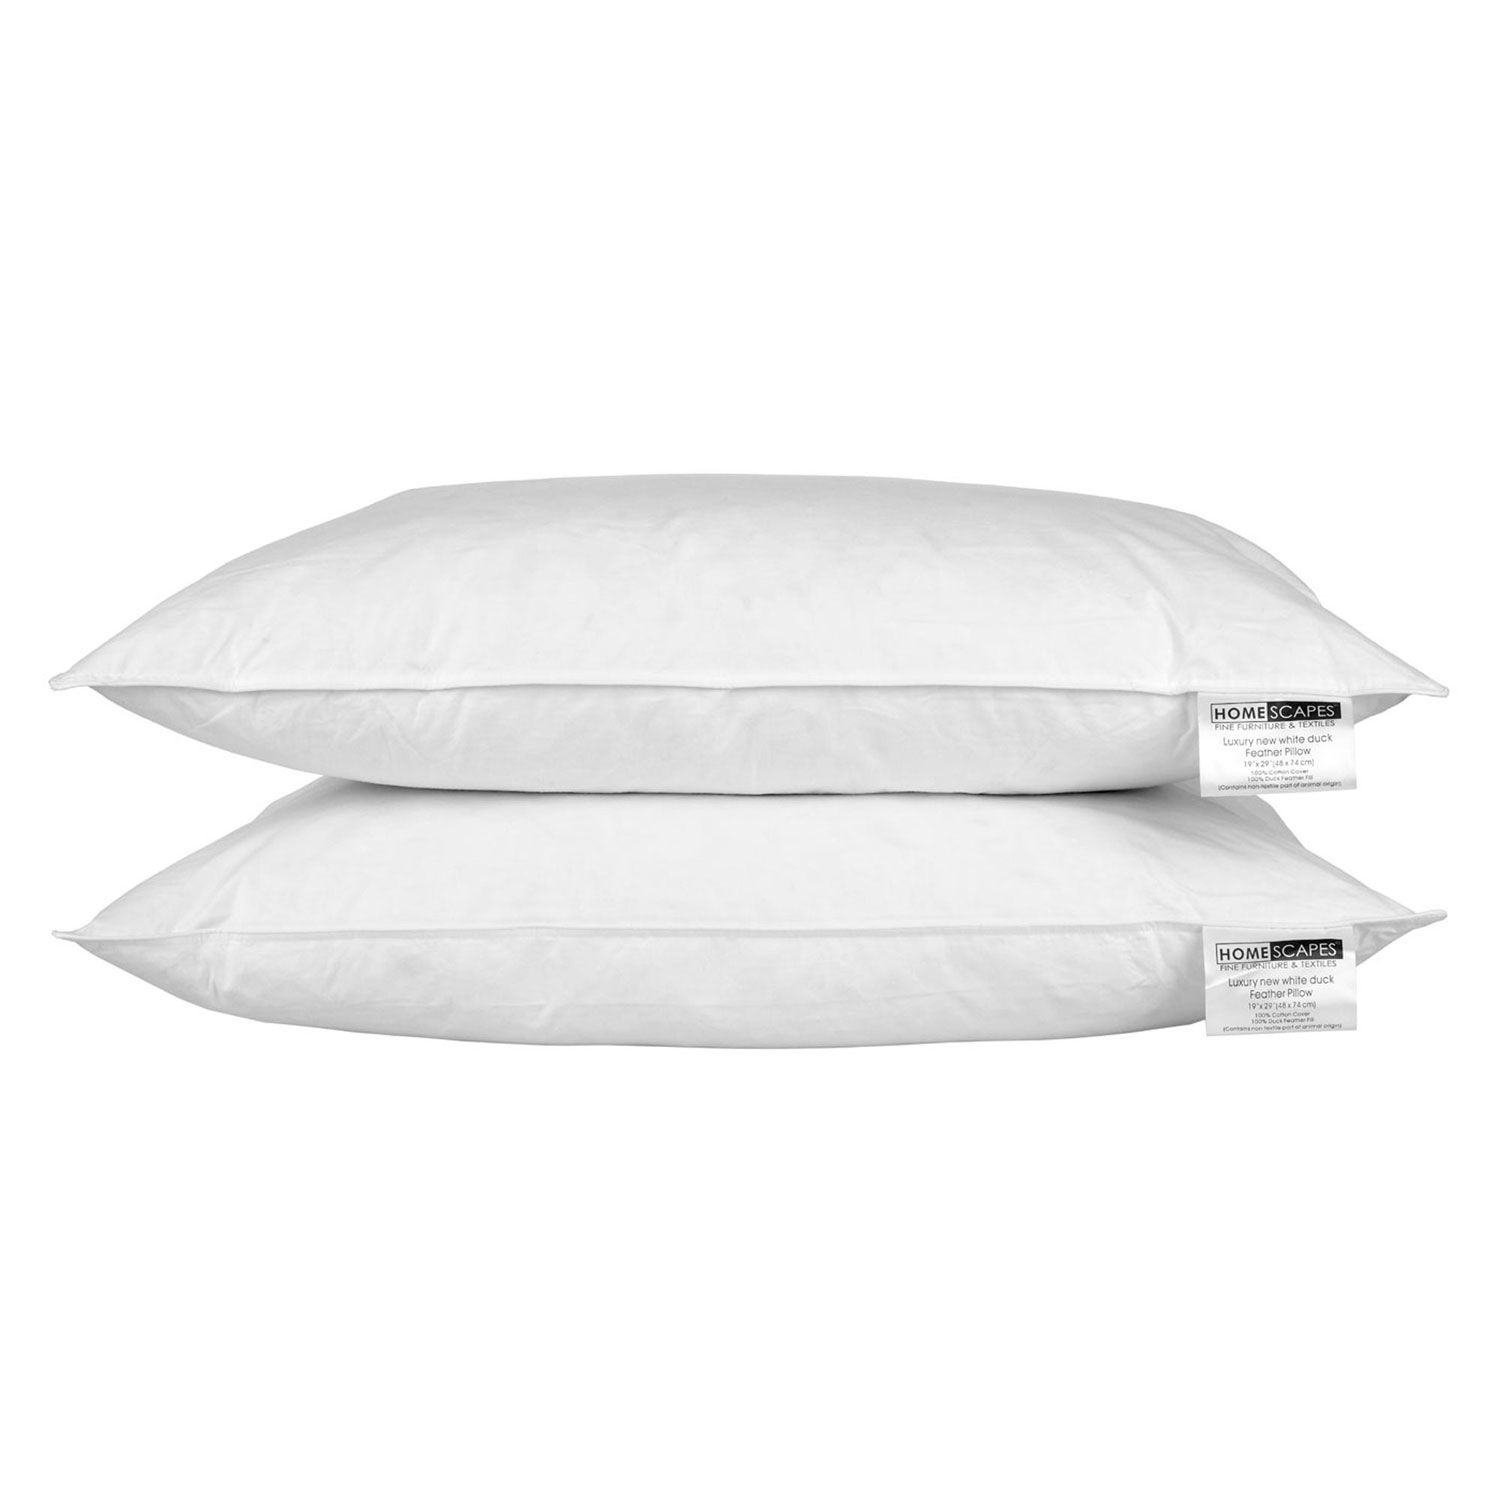 Duck Feather Jumbo Extra Filled Large Pillow 100cm x 80cm White pillowcase 